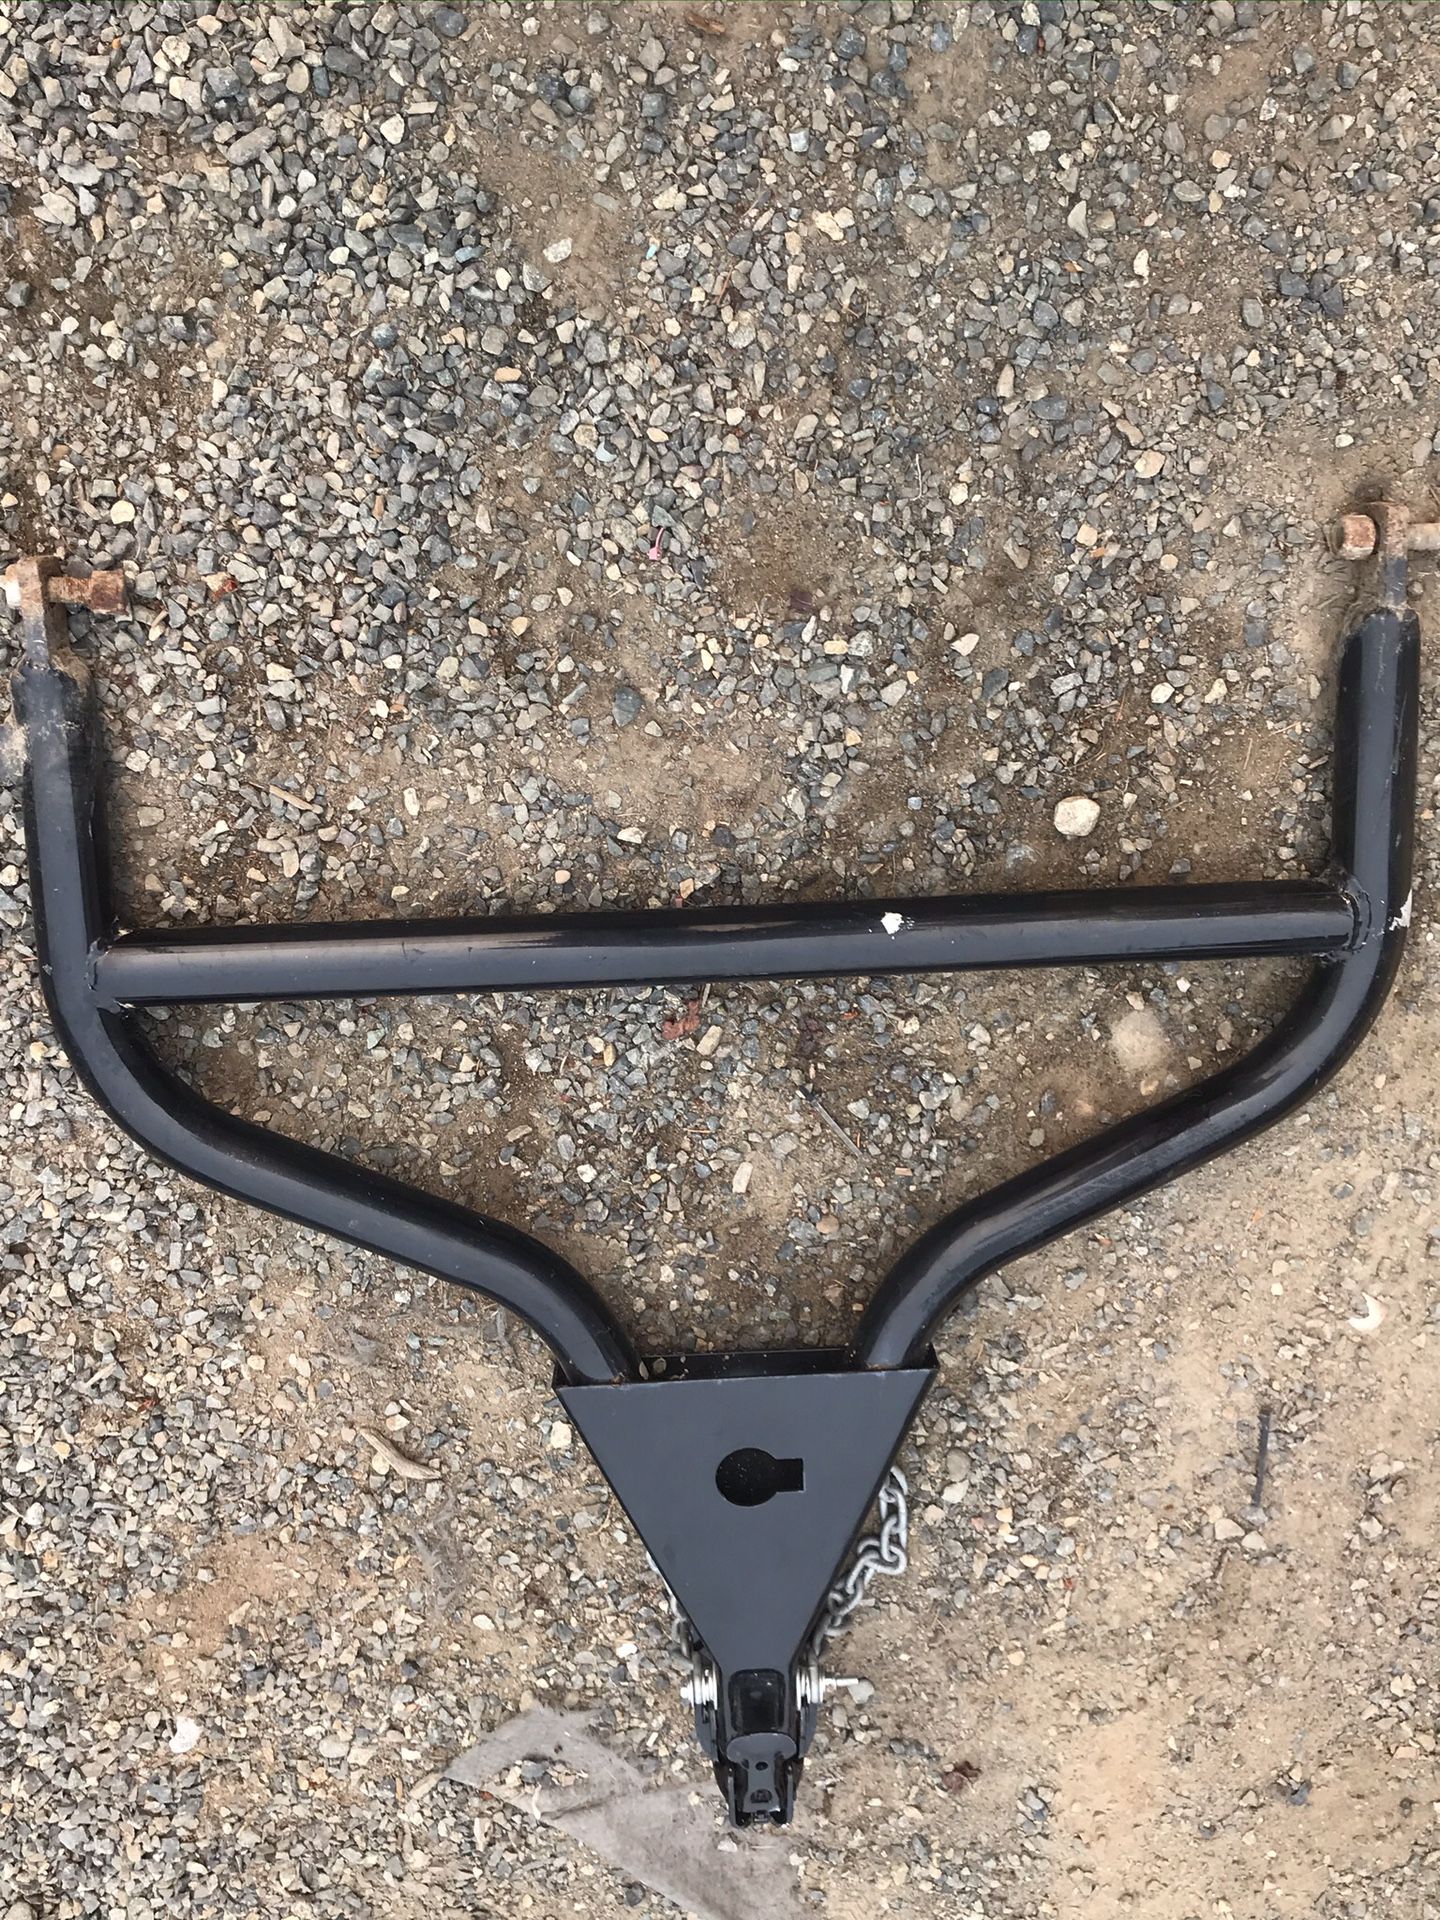 Jeep tow bar. Barely used. $100.00